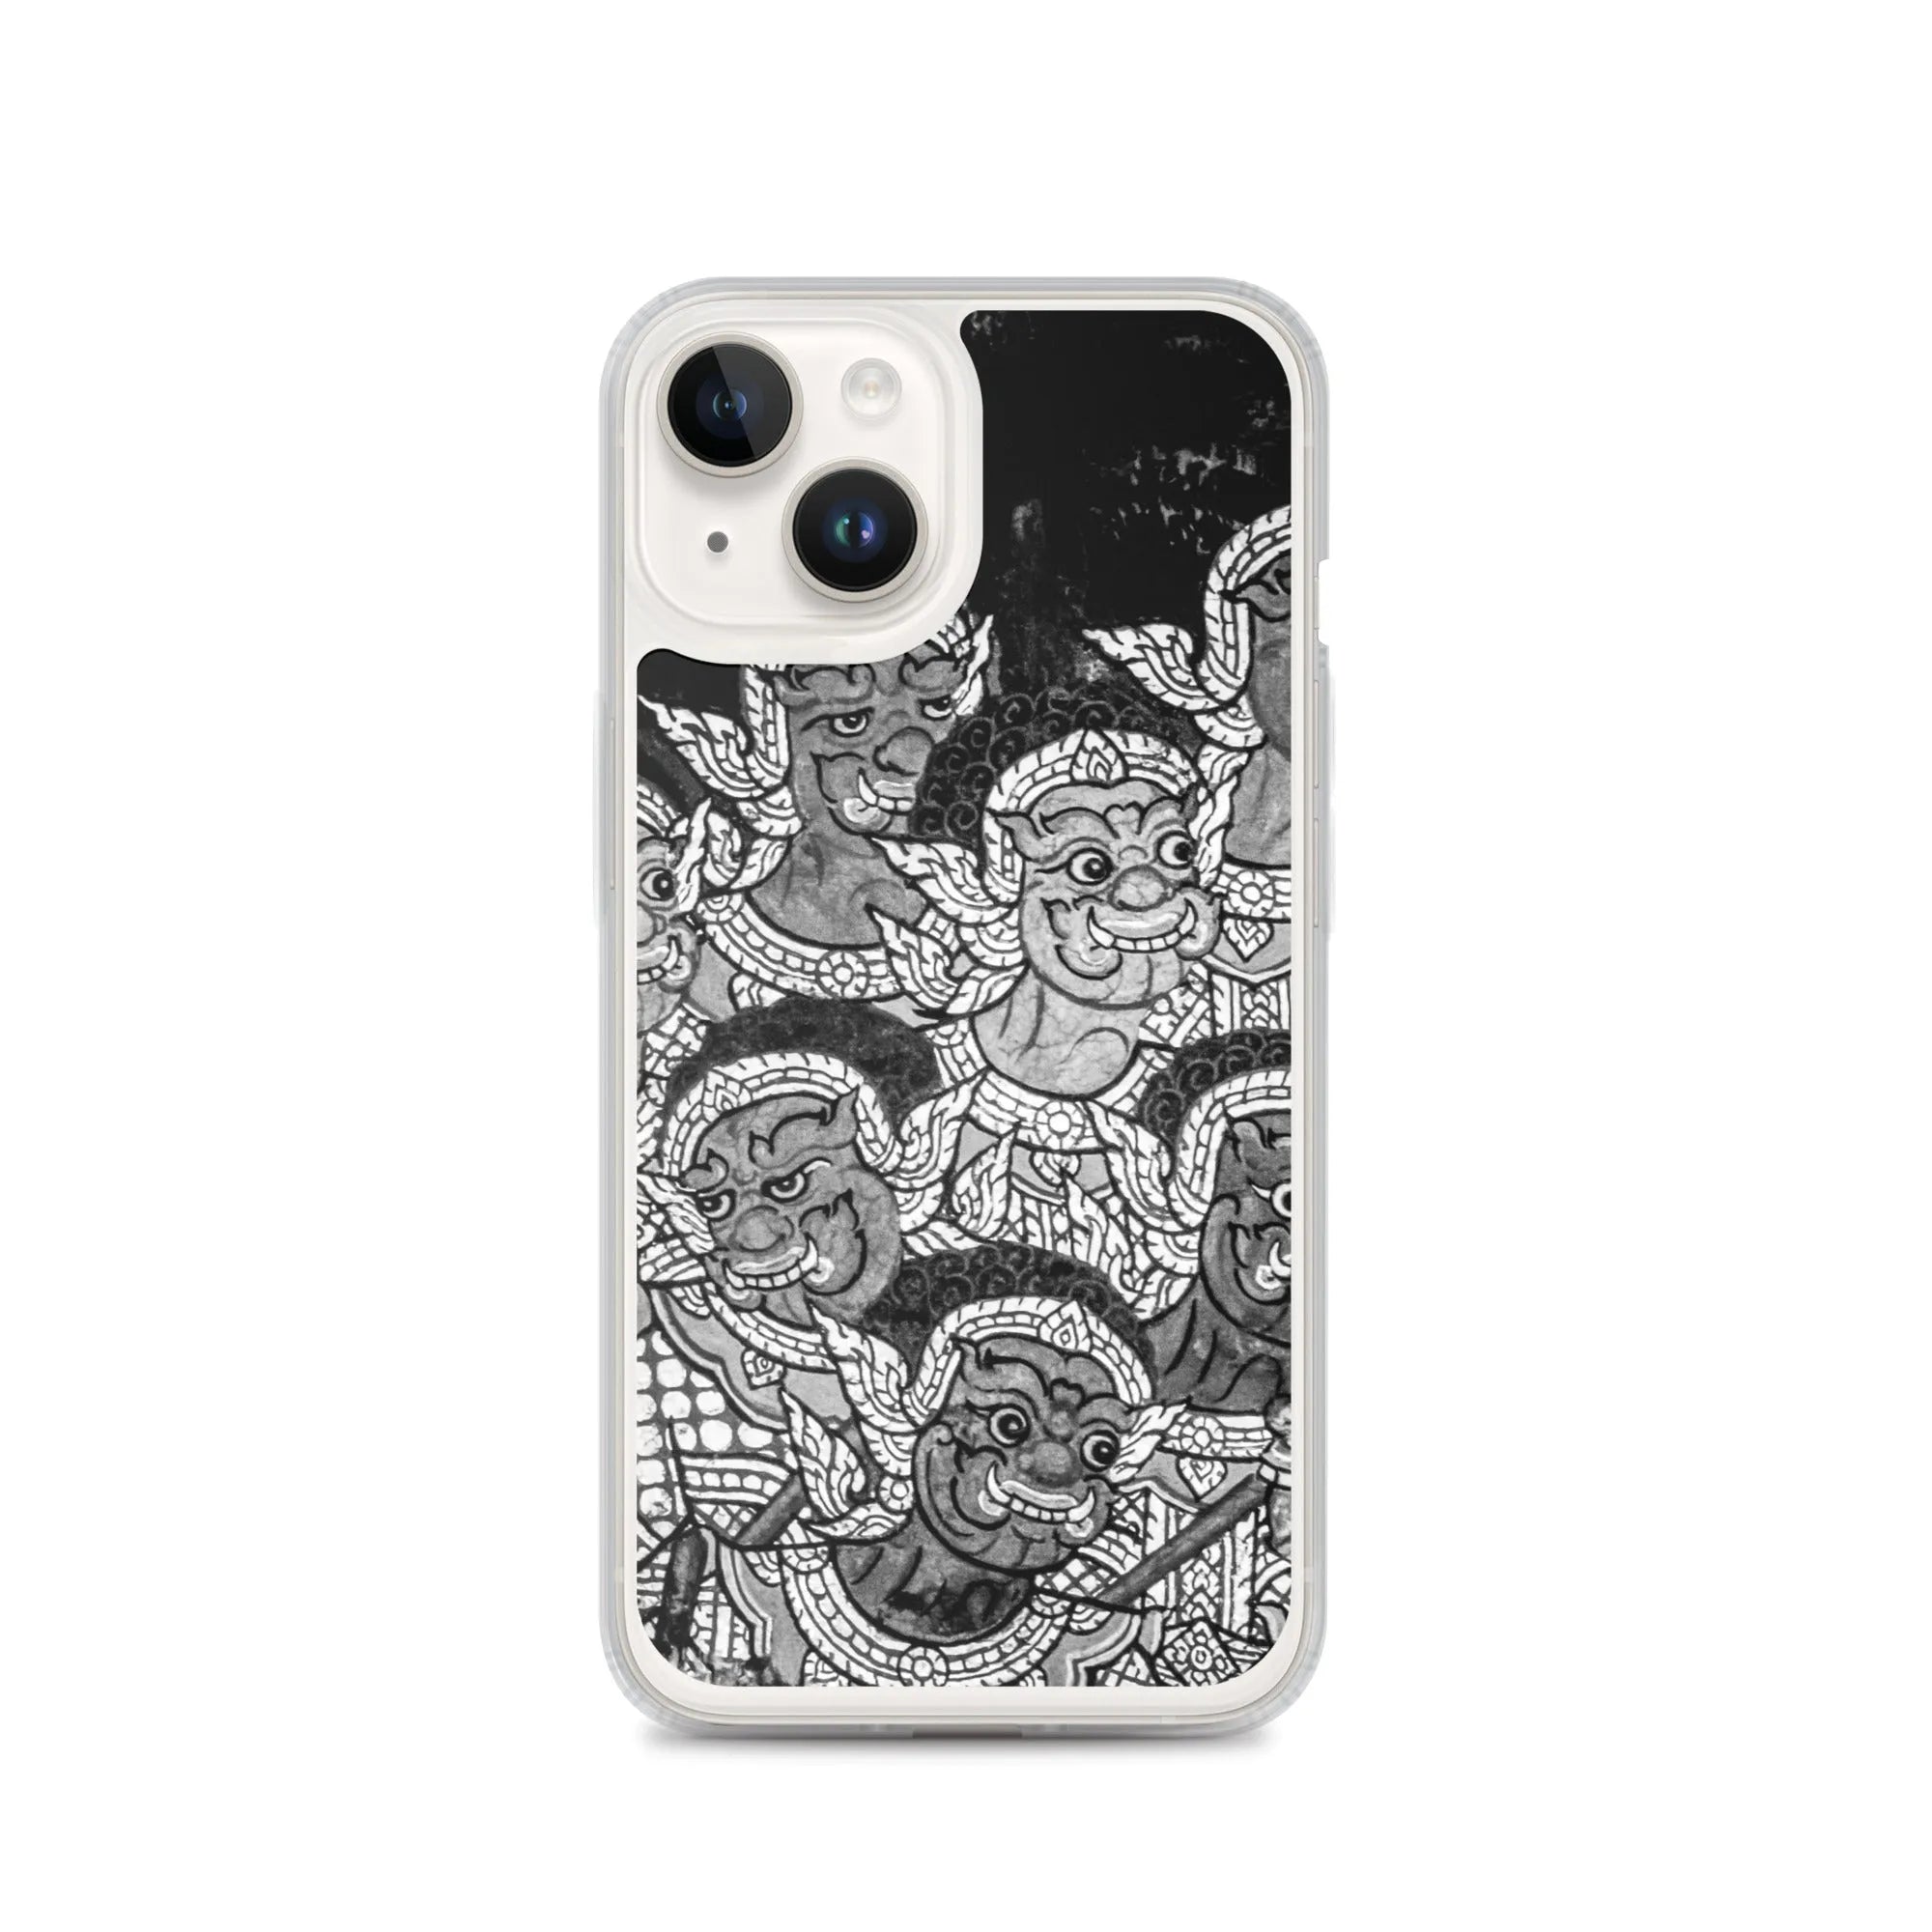 Babes In The Woods - Designer Travels Art Iphone Case - black And White - Iphone 14 - Mobile Phone Cases - Aesthetic Art